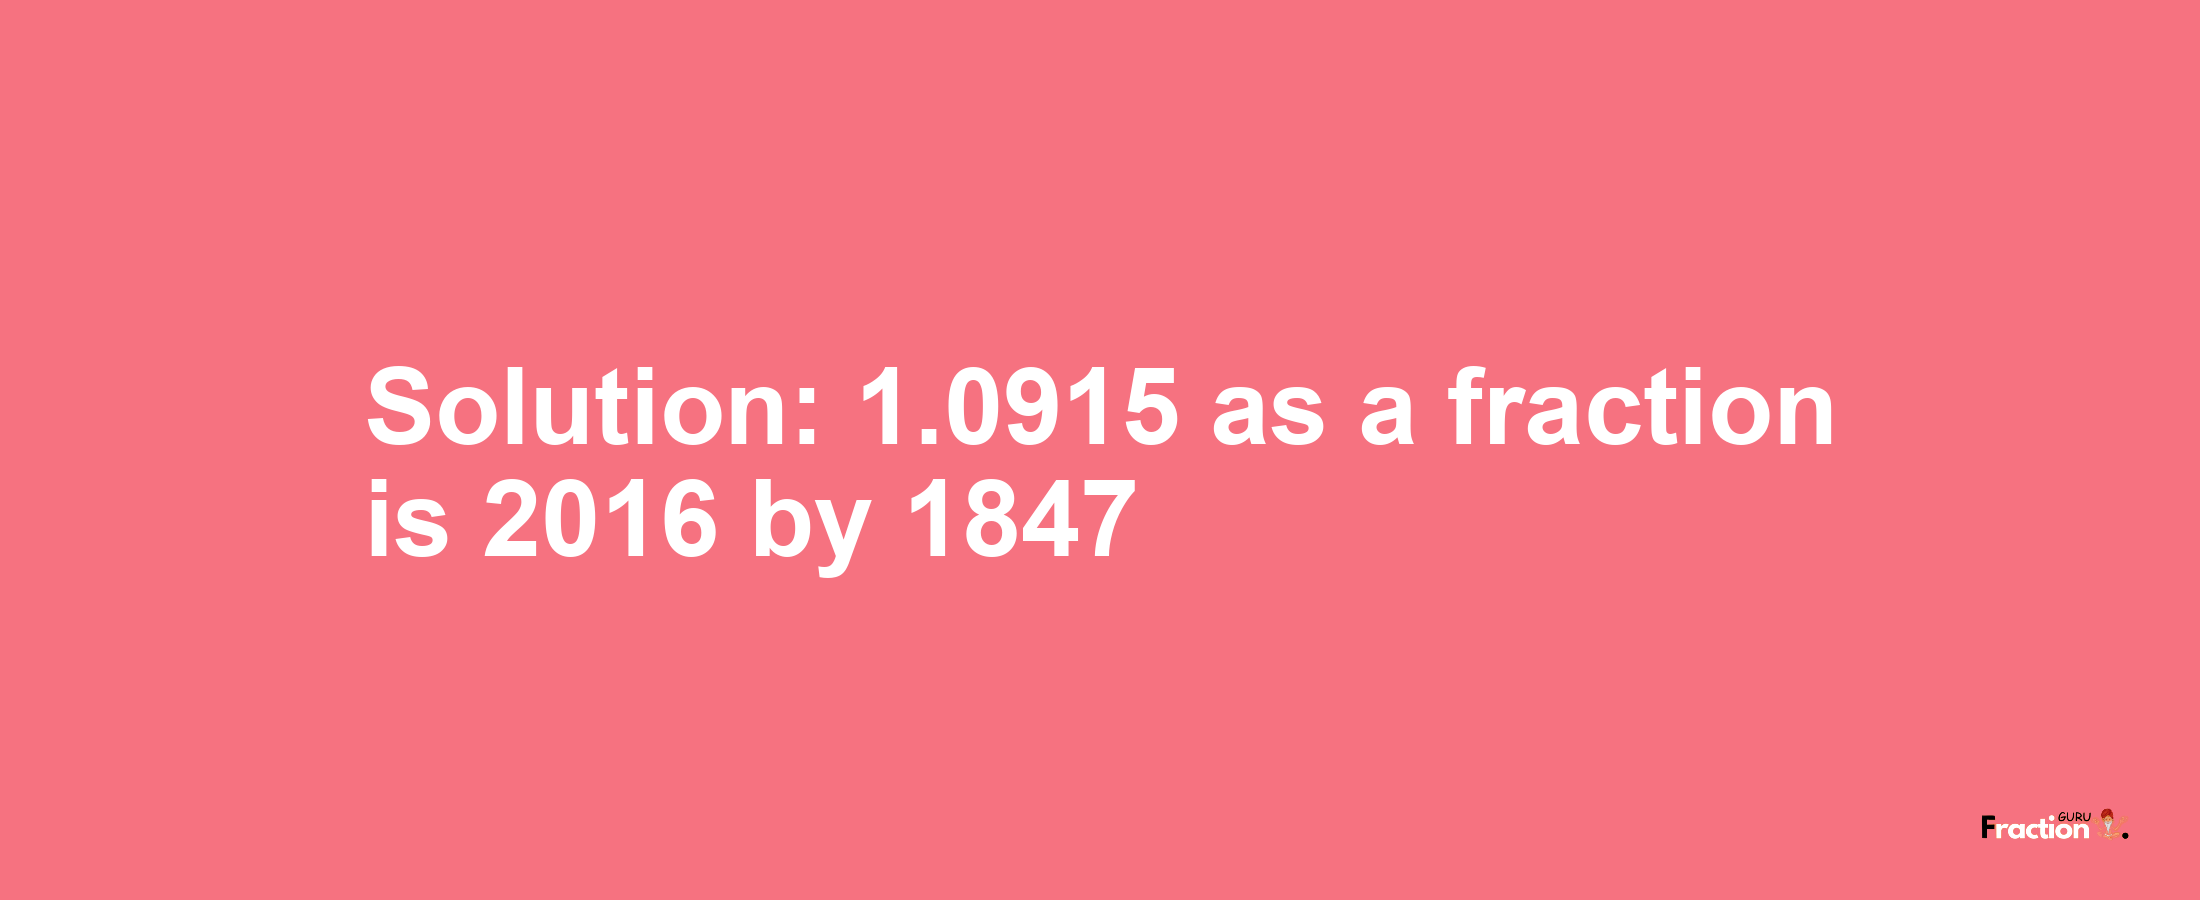 Solution:1.0915 as a fraction is 2016/1847